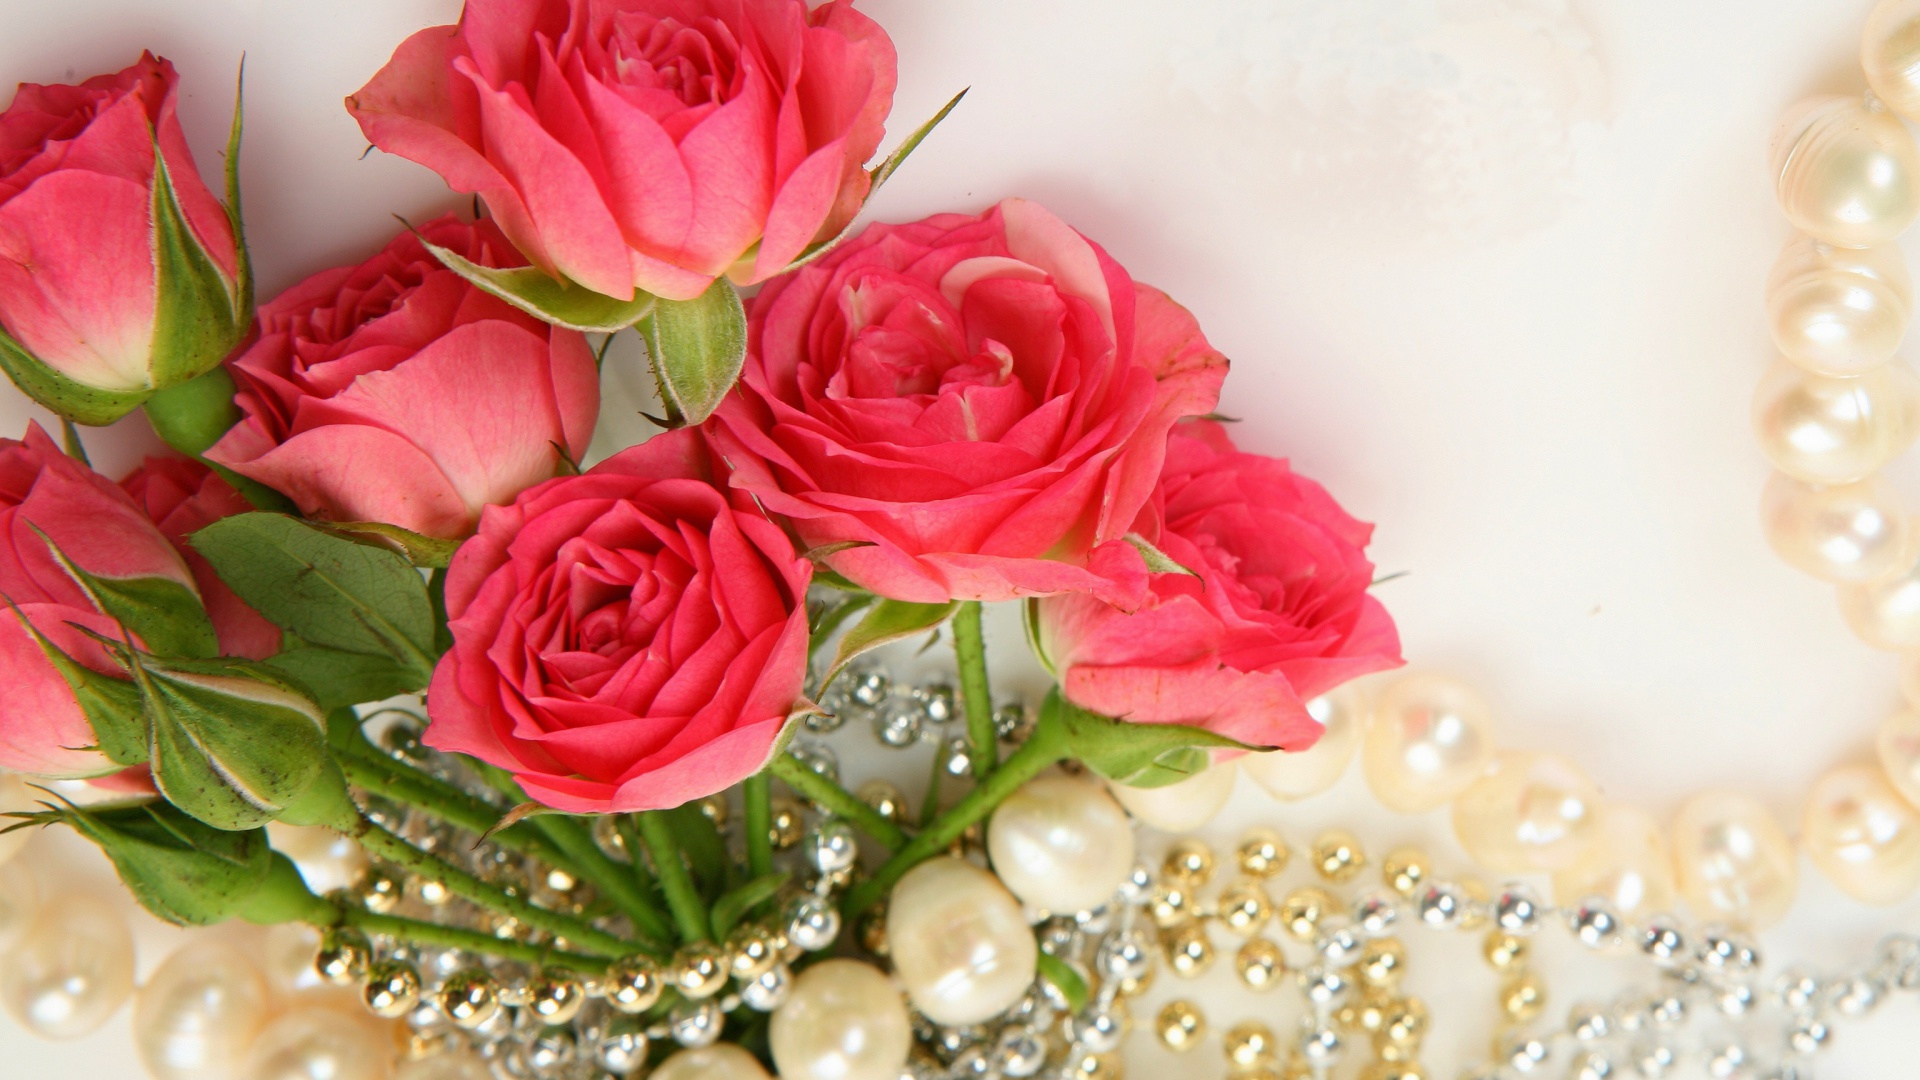 Sfondi Necklace and Roses Bouquet 1920x1080